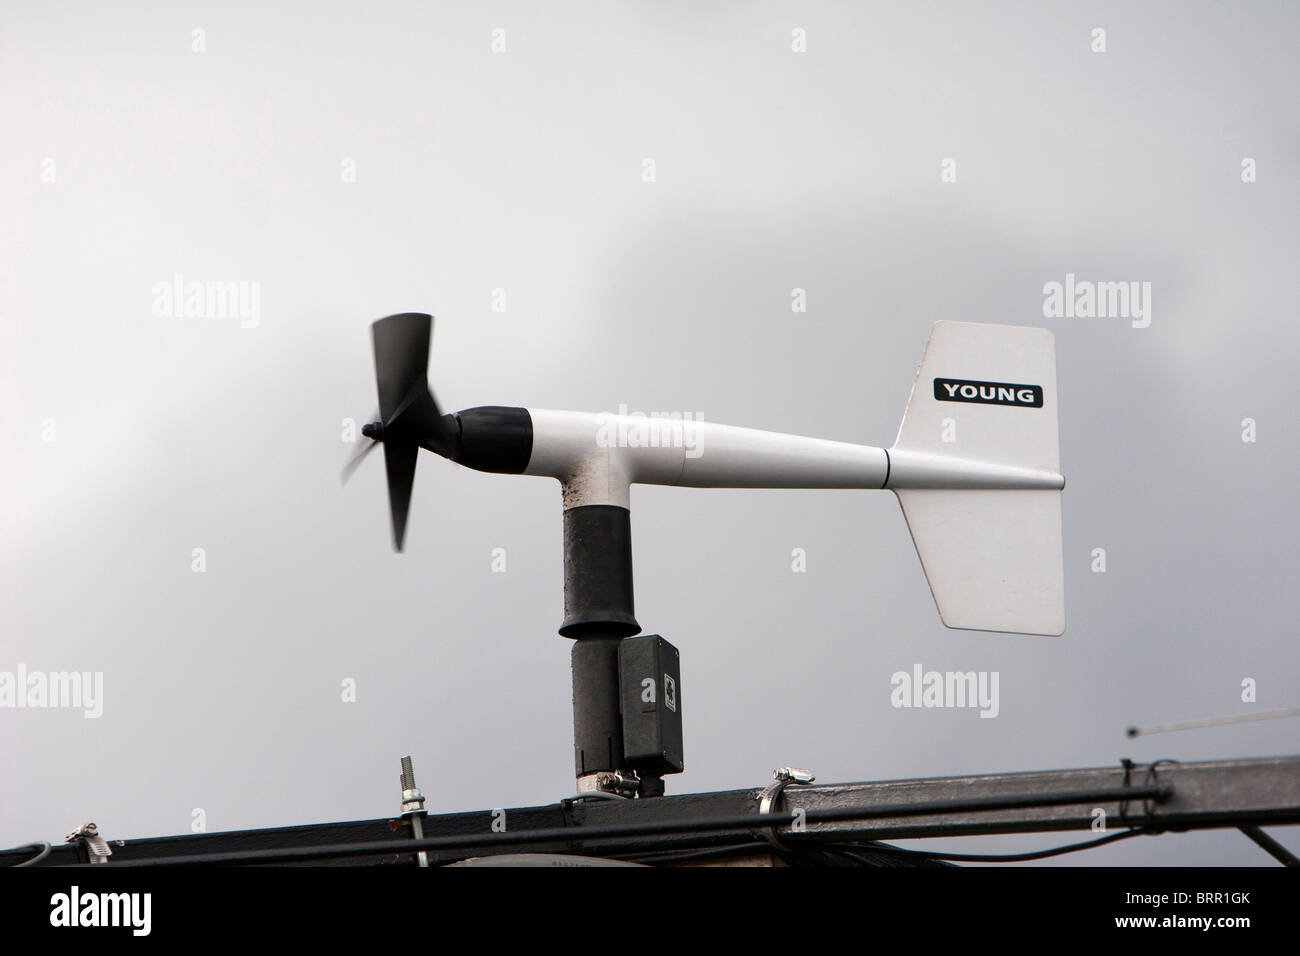 A Young brand anemometer. Stock Photo